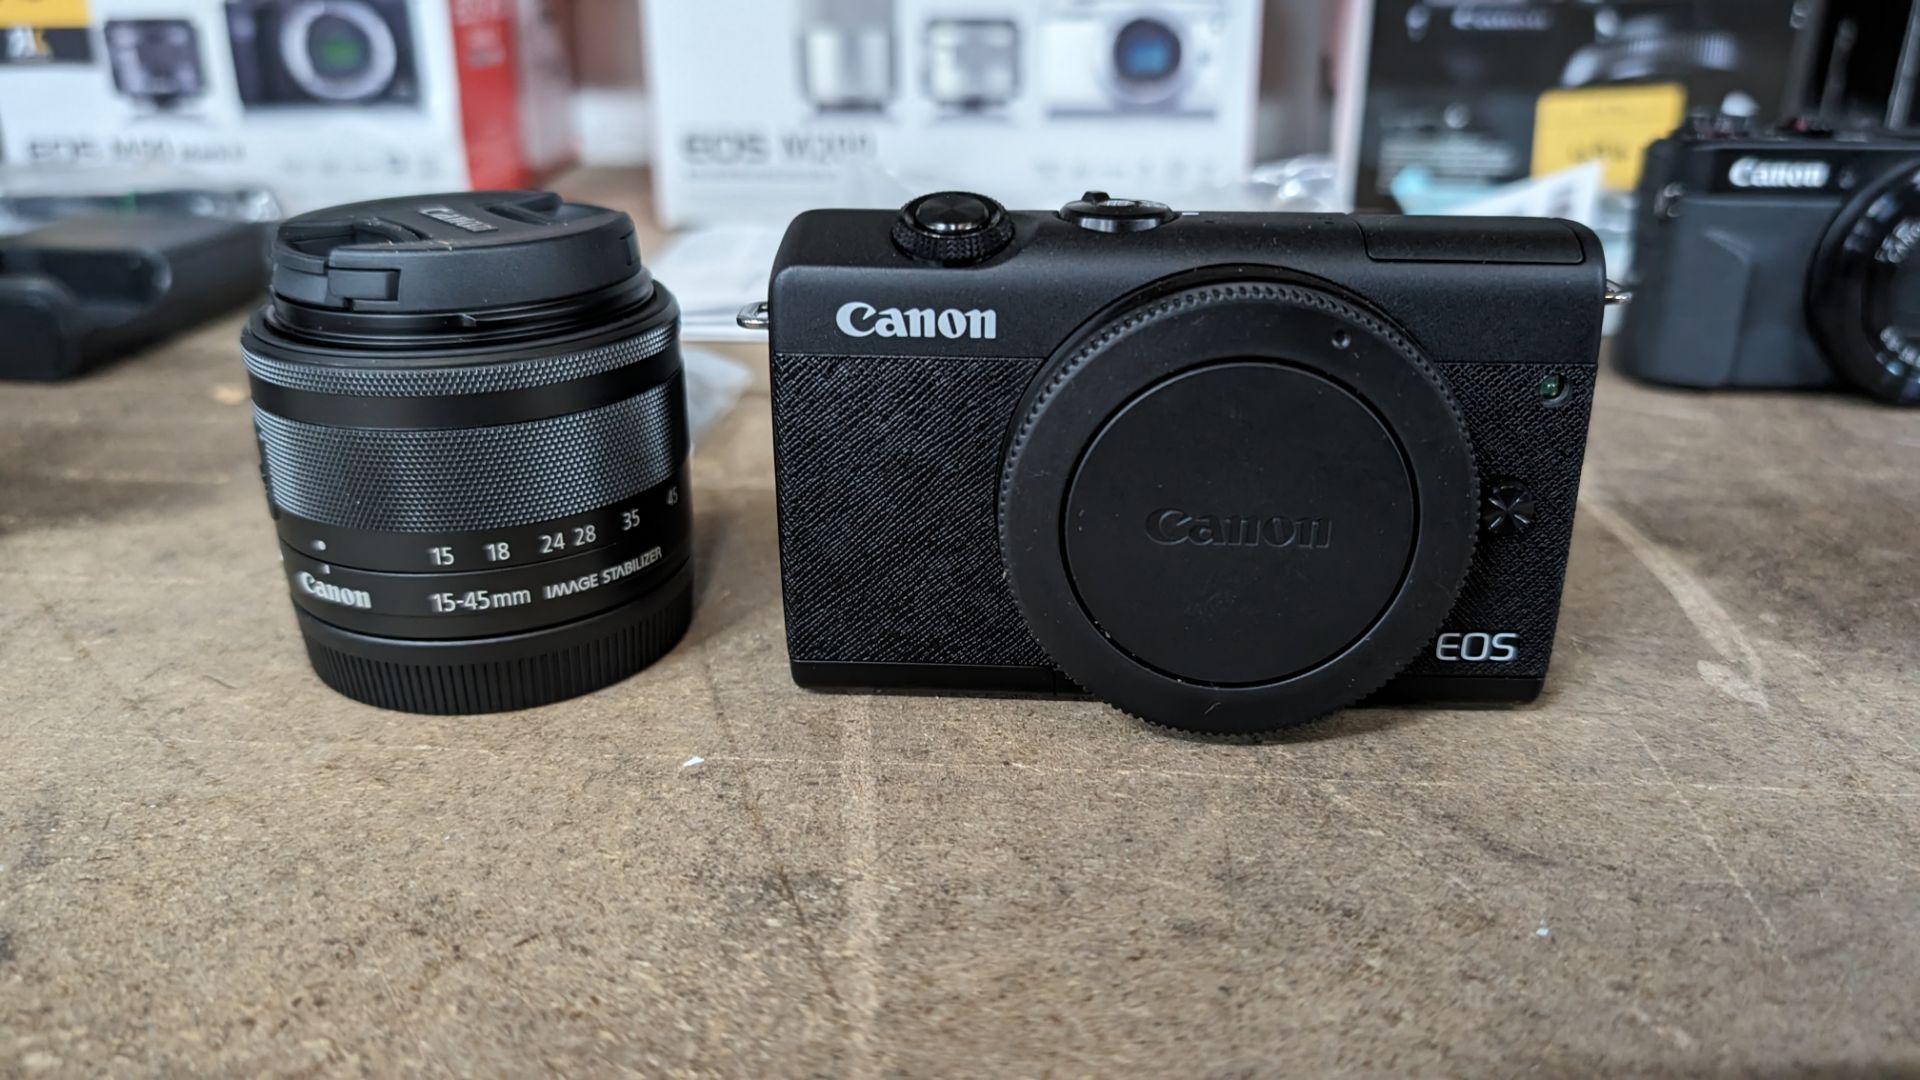 Canon EOS M200 camera kit, including 15-45mm image stabilizer lens, plus battery and charger - Bild 4 aus 12